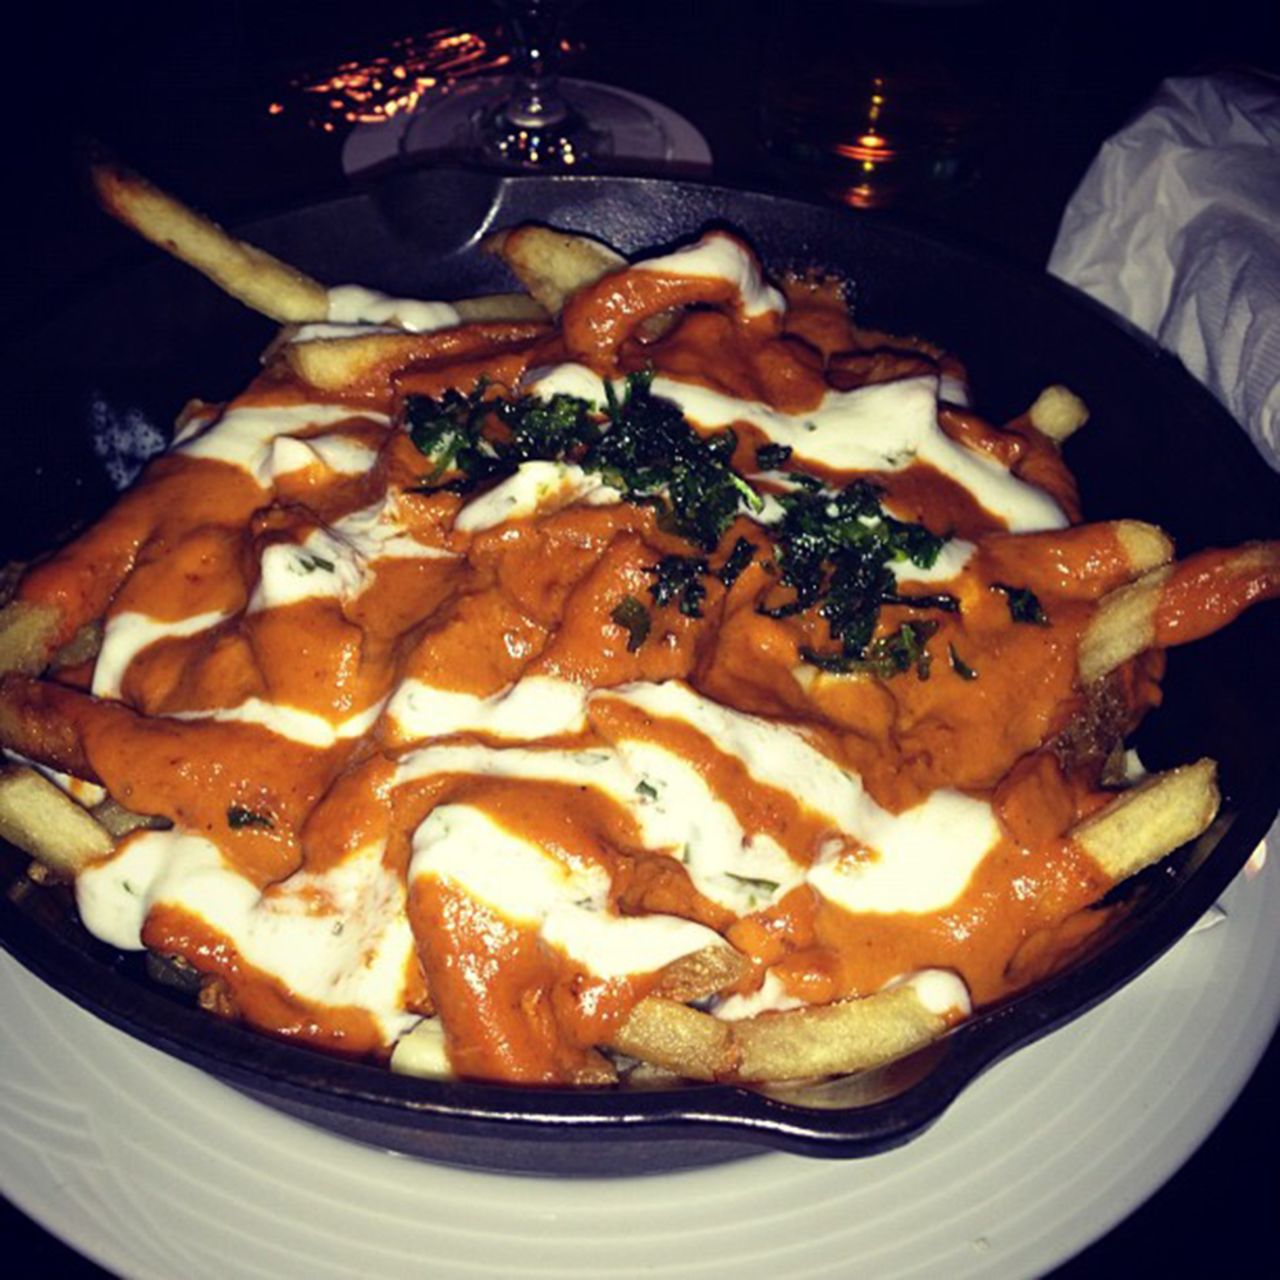 What do you get when you cross Indian tradition with a hungry Canadian? Butter chicken poutine!